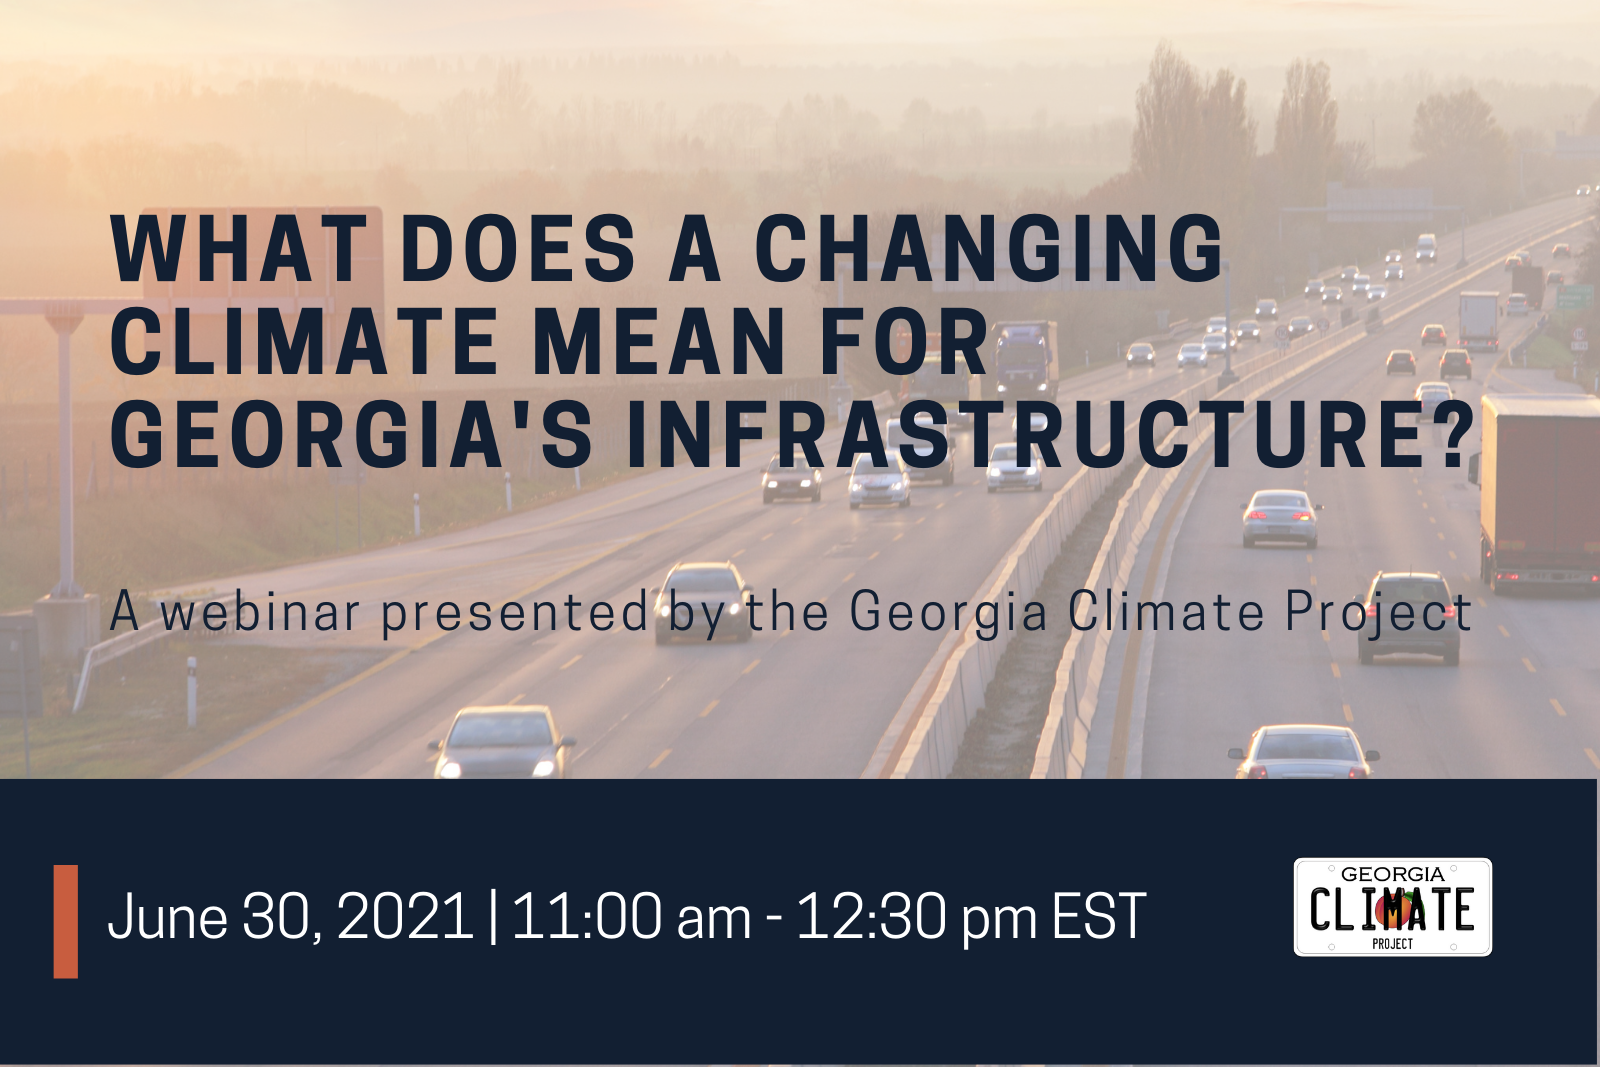 Recording now available for our Apr. 2021 Webinar: Equity and Justice in a Changing Climate in Georgia